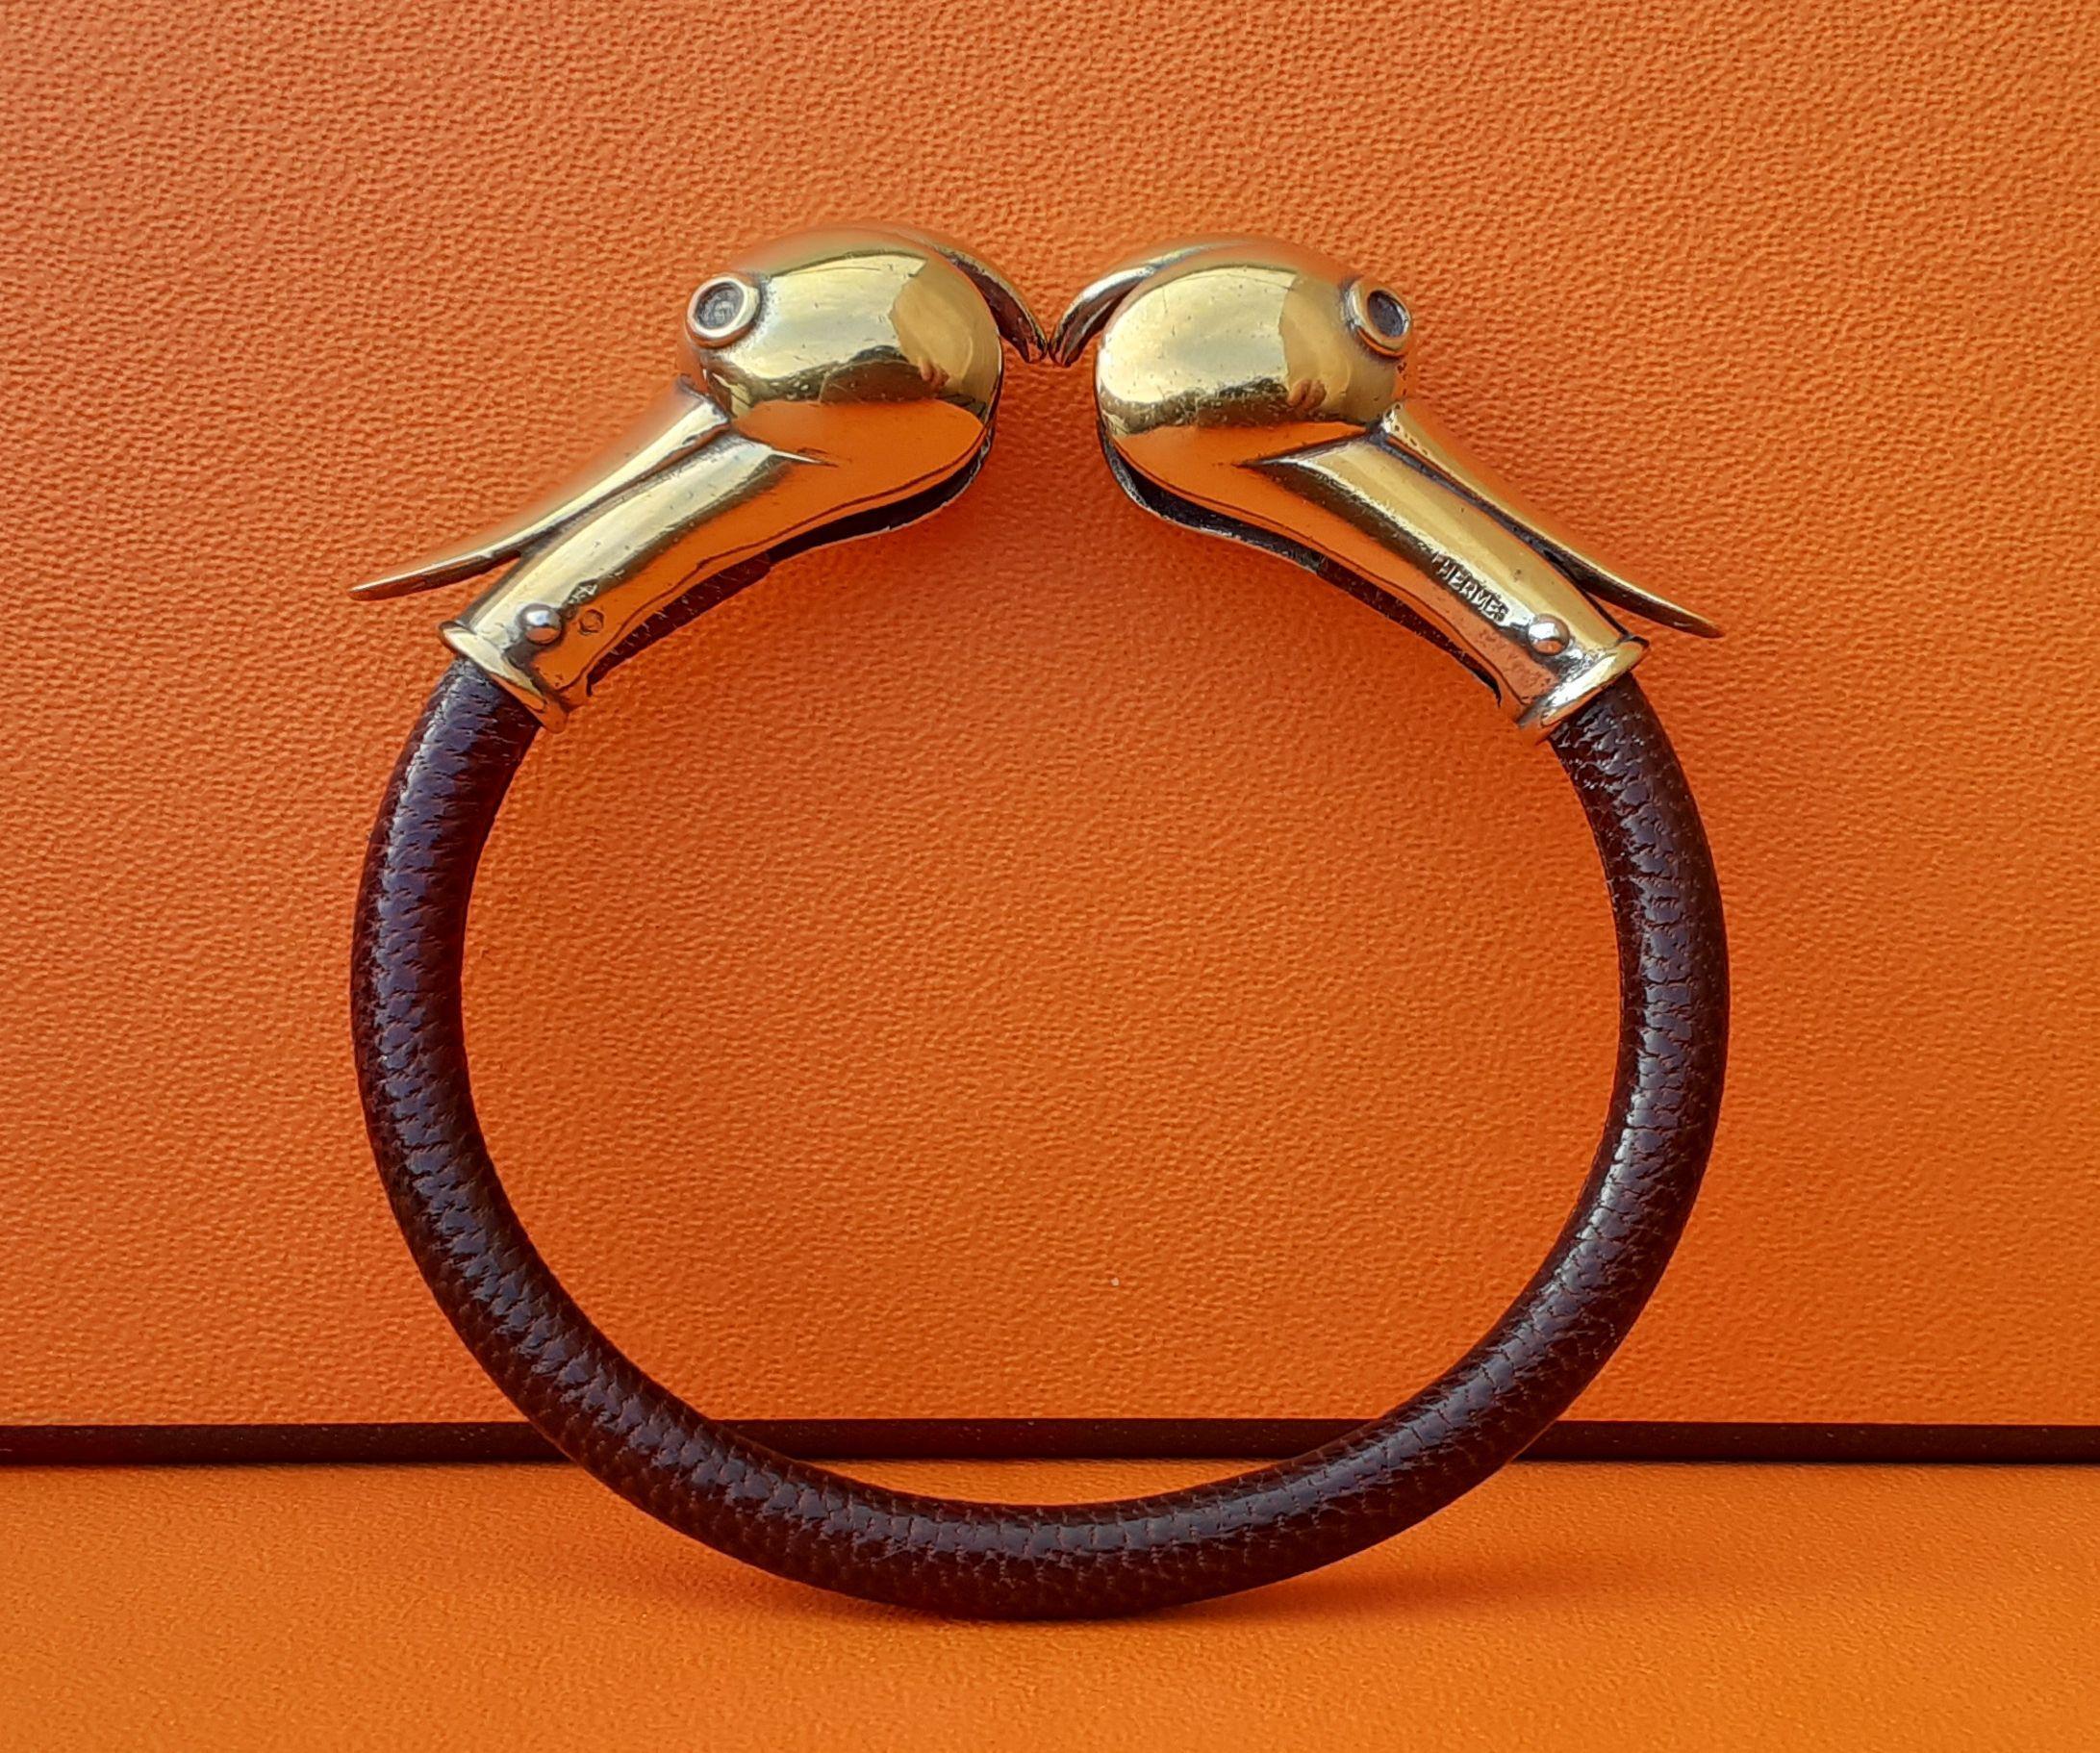 Extremely Rare Authentic Hermès Bracelet

In shape of Ducks Heads

Open bracelet

Vintage Item

Made of Lizard Skin and Vermeil (silver covered with gold)

Colorways: Brown, Golden

